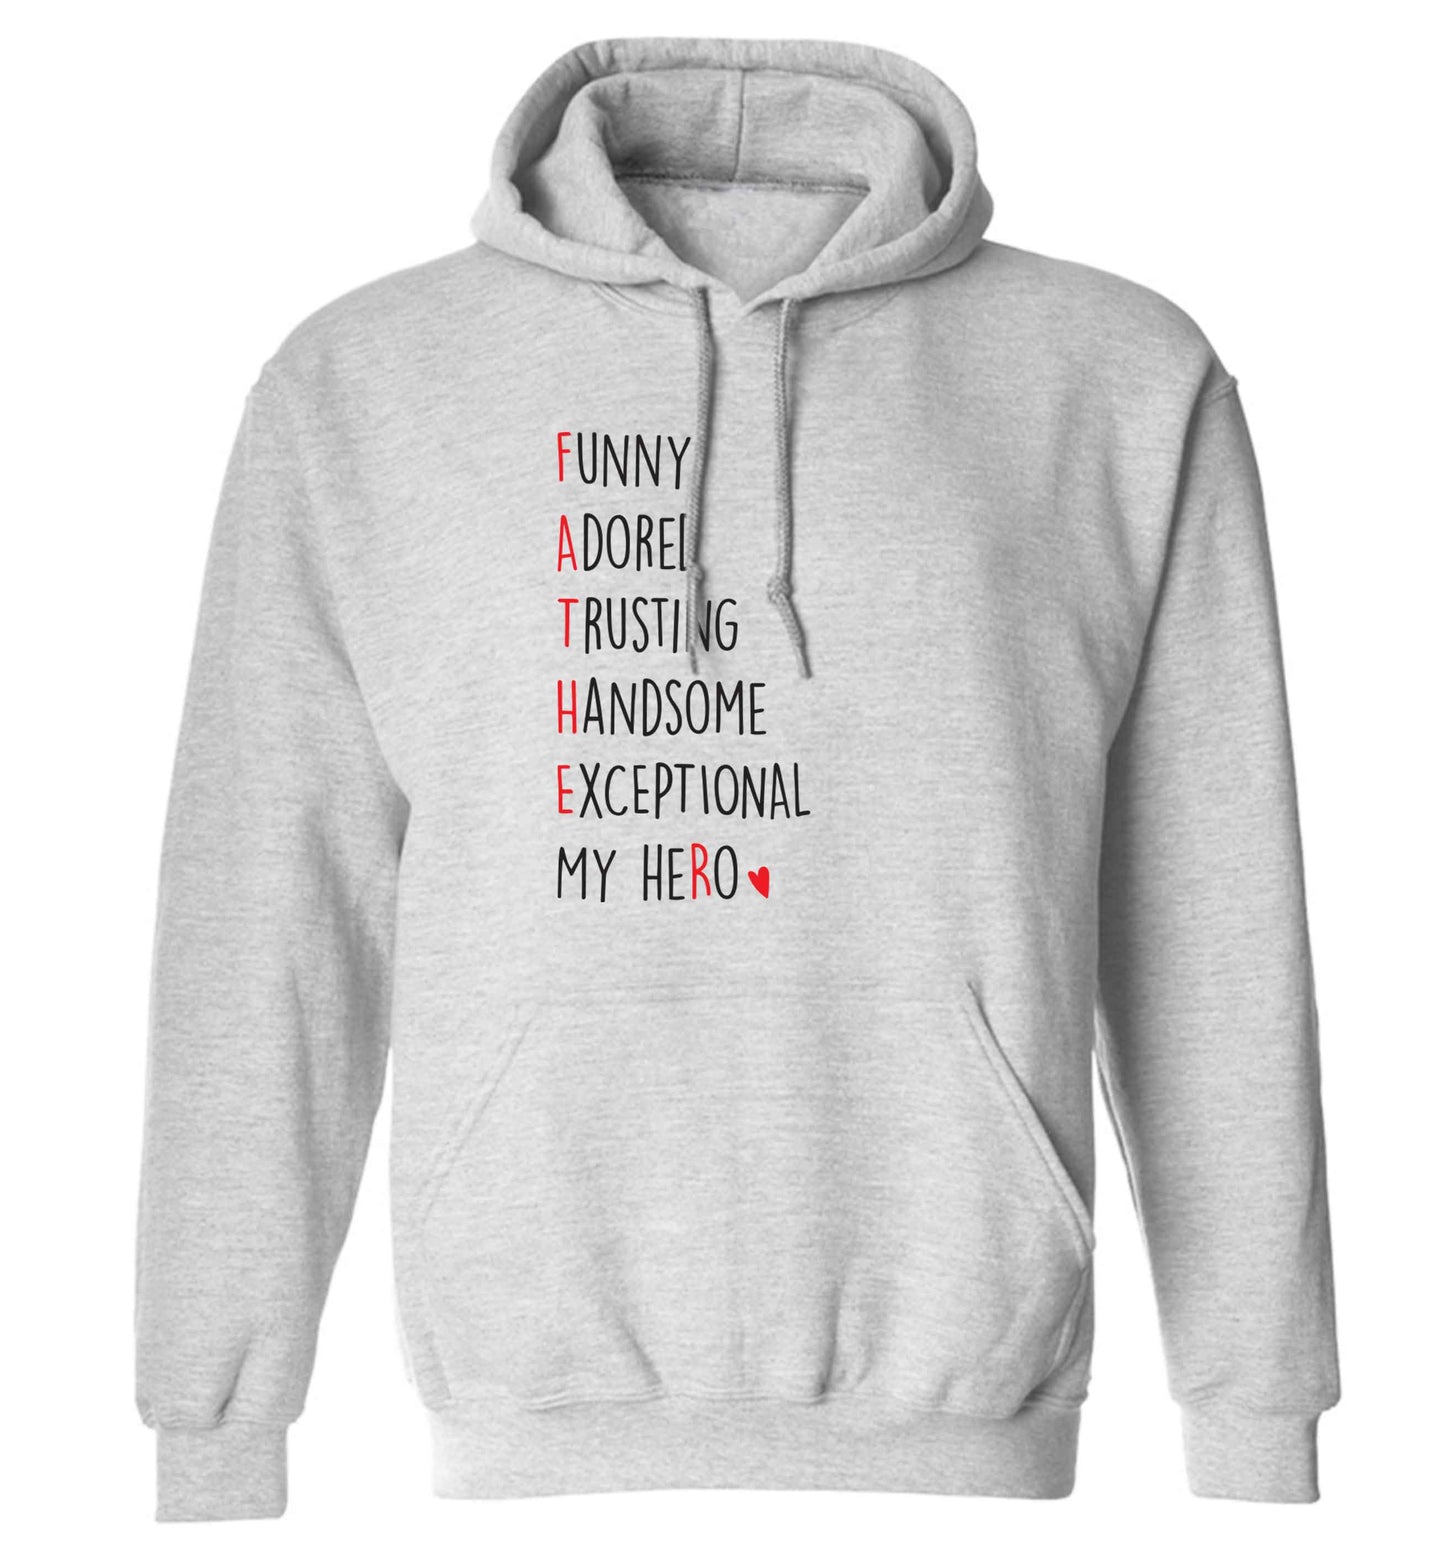 Father, funny adored trusting handsome exceptional my hero adults unisex grey hoodie 2XL